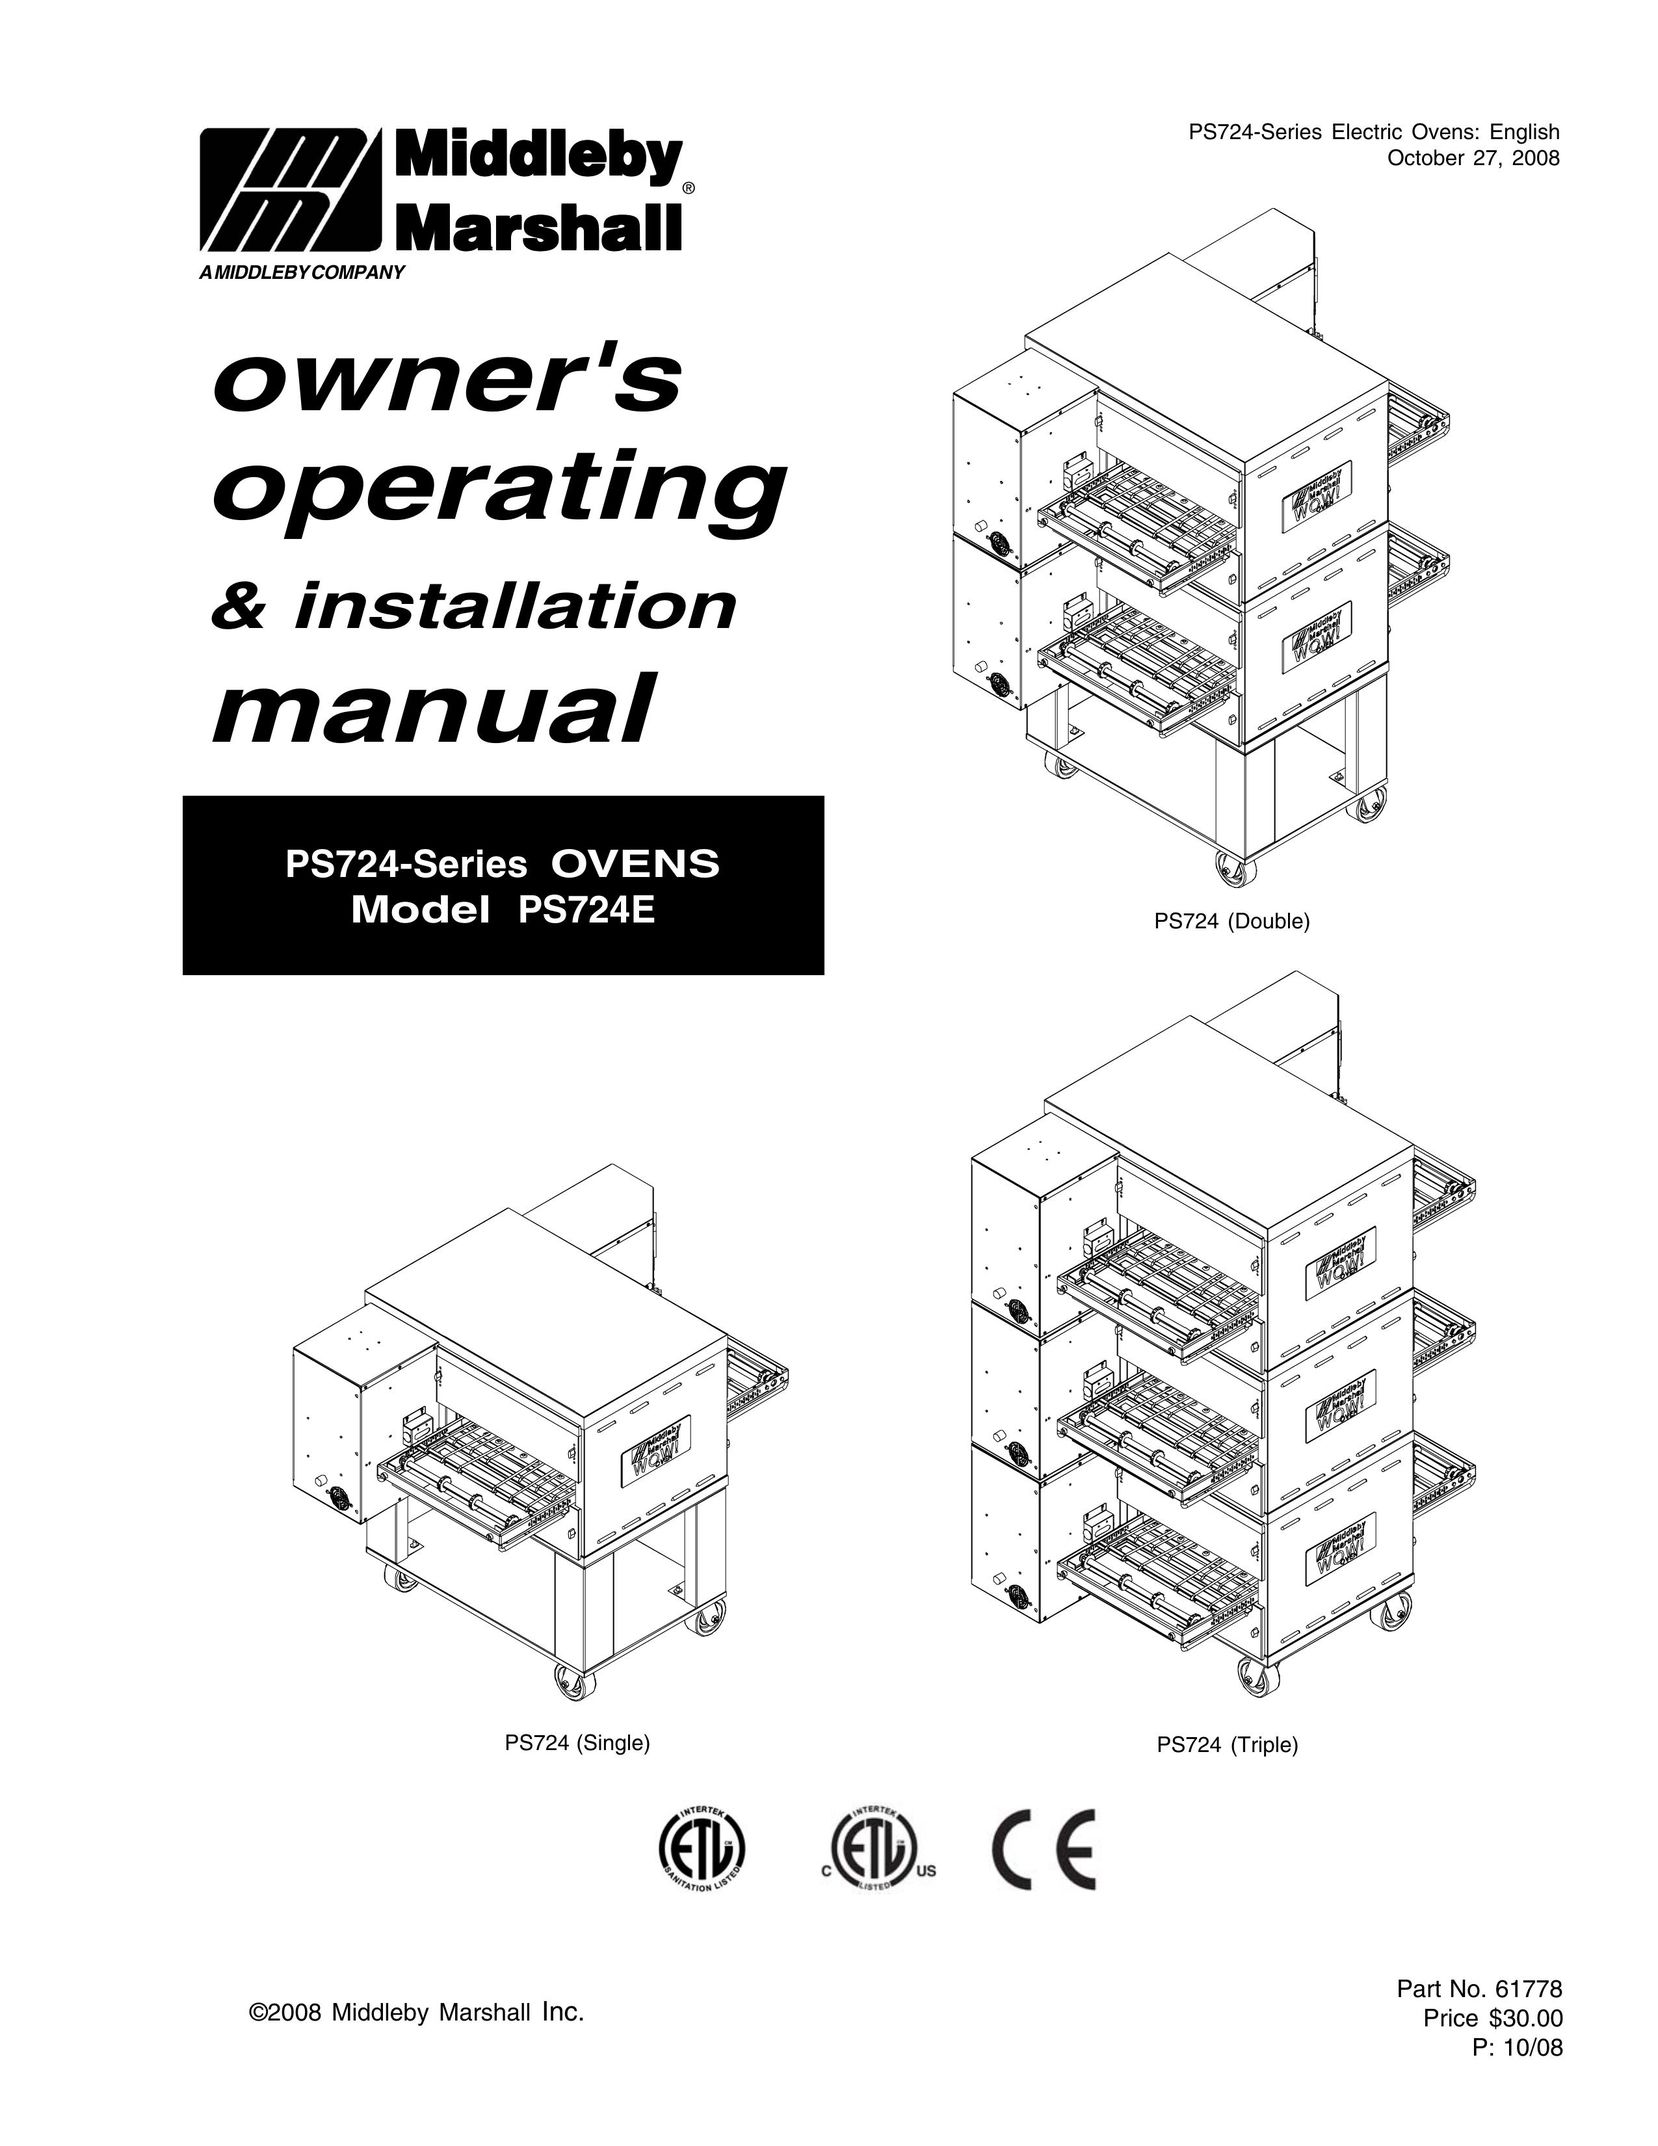 Middleby Marshall PS724E Double Oven User Manual